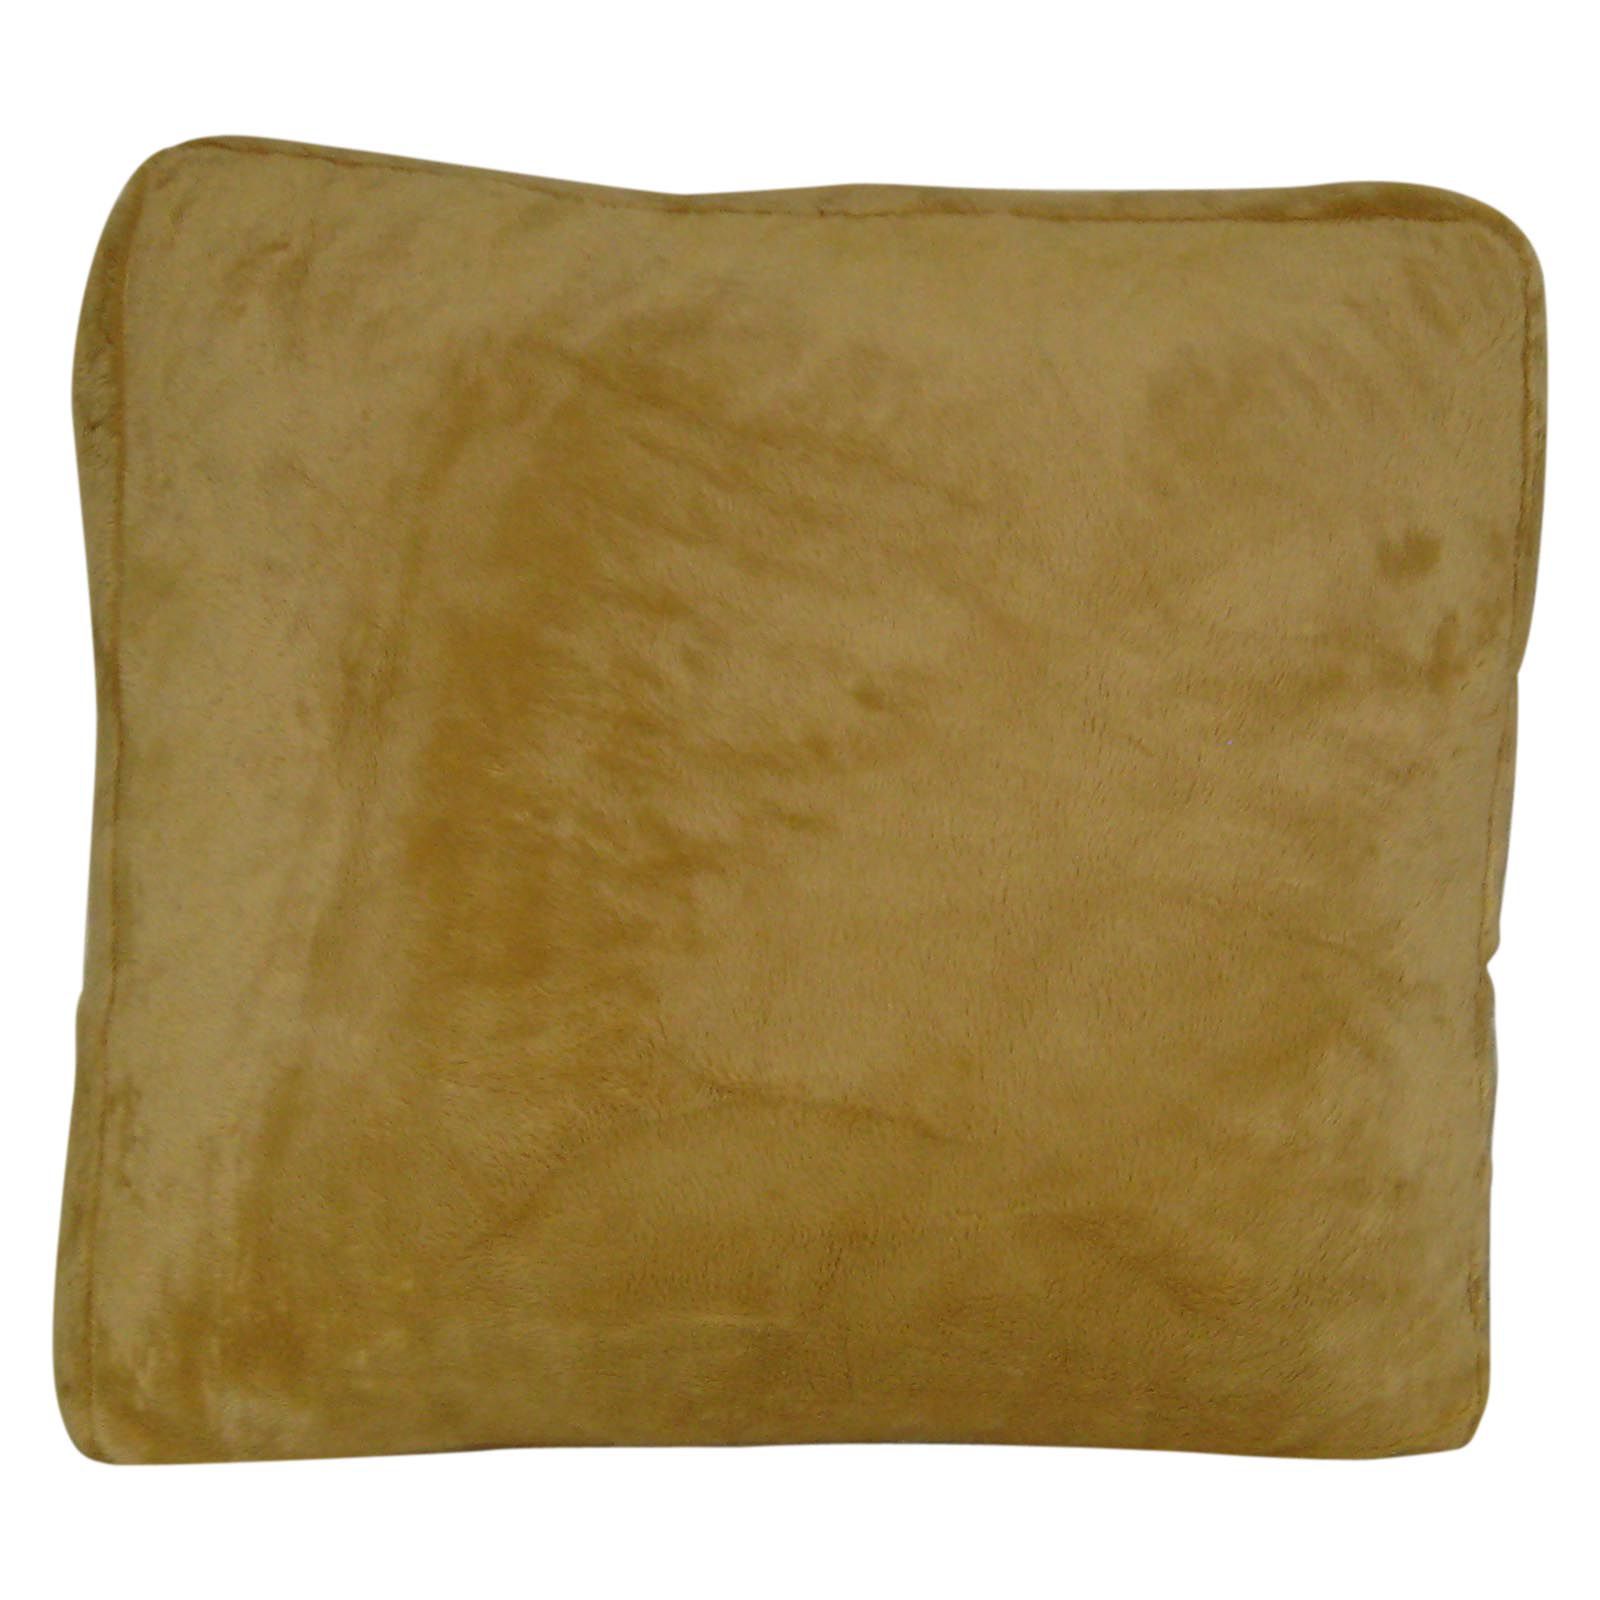 Whole Home 17 in. x 17  in. x 7 in. Decorative Plush Pillow - Gold